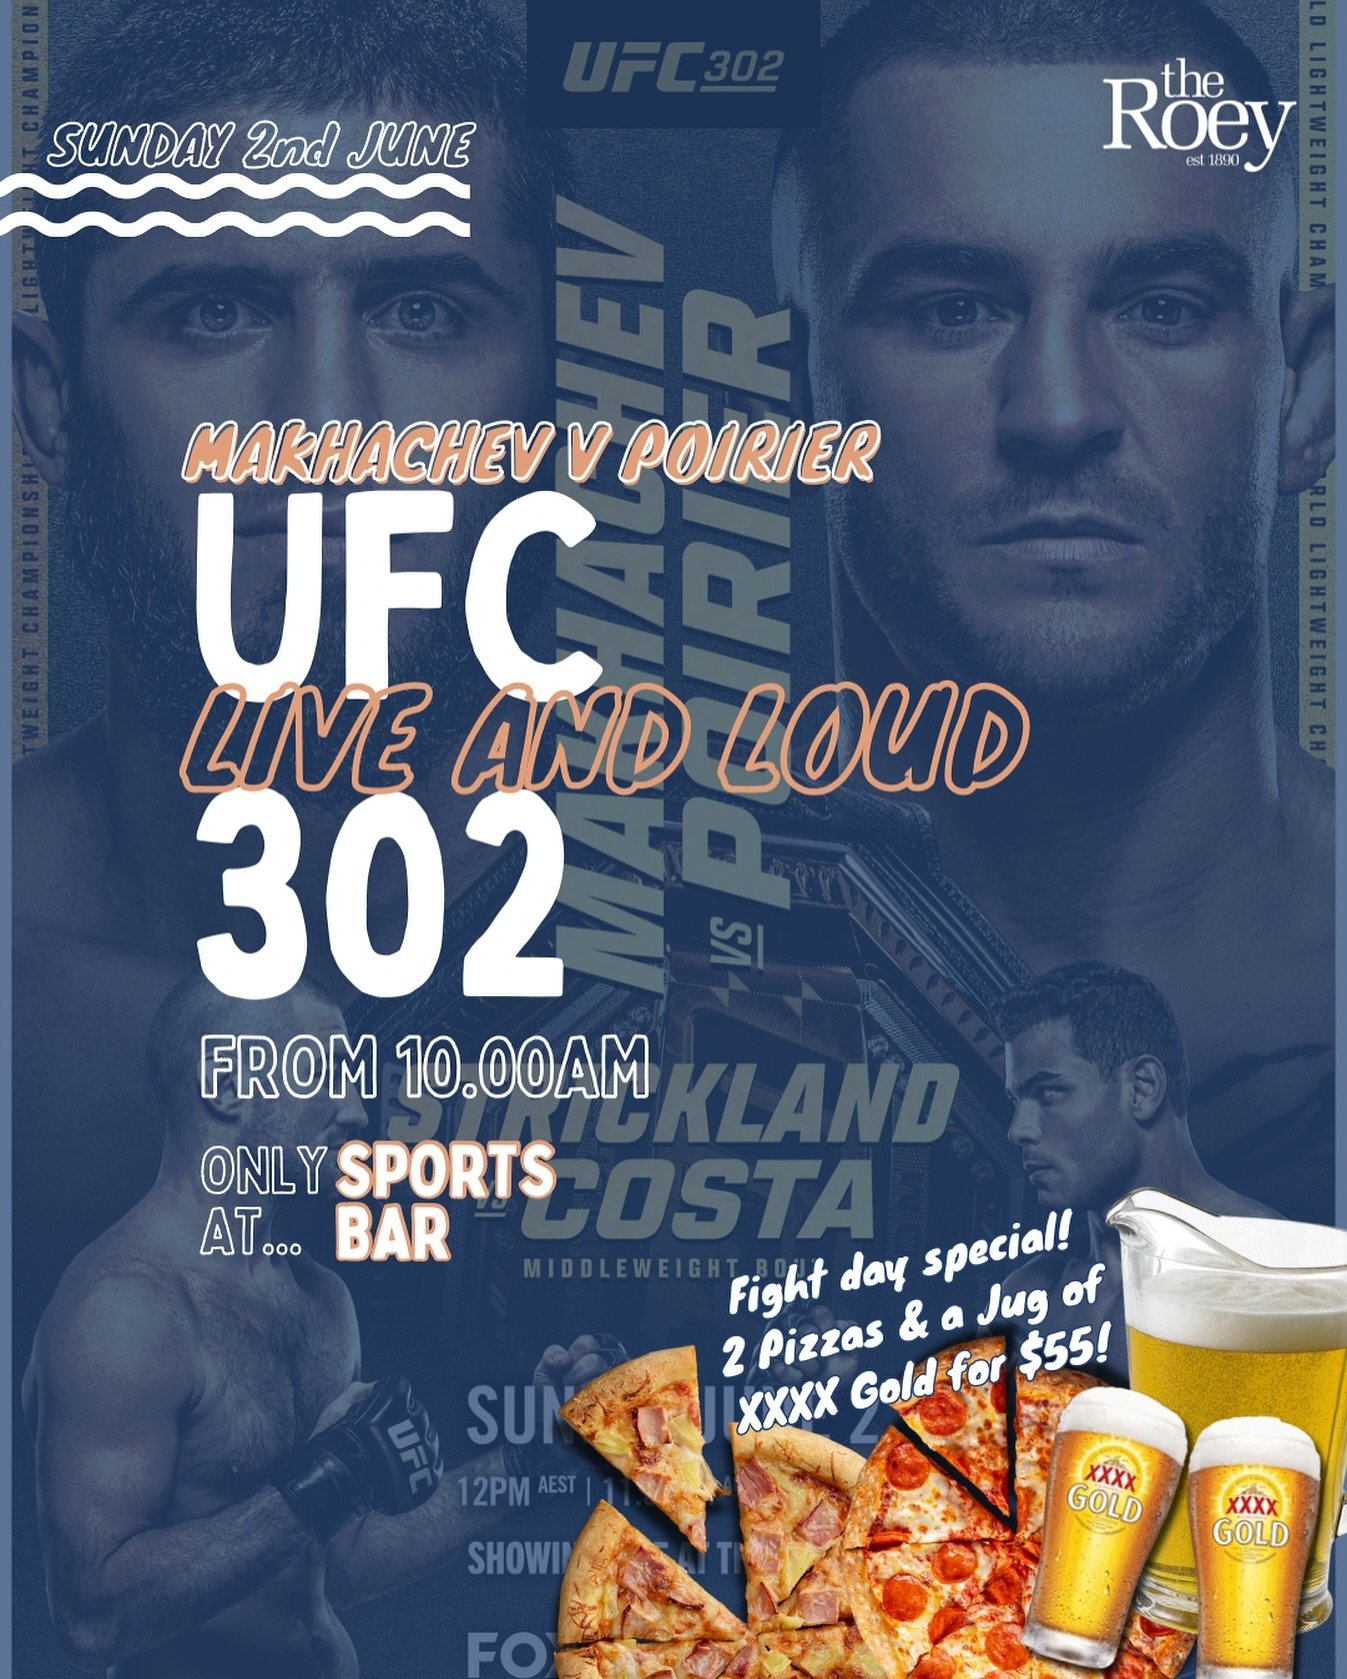 Live &amp; Loud 💥 on the big screens in the Sports Bar from 10am 

🥊UFC 302🥊
Makhachev vs Poirier
World Lightweight Championship

Fuel up with our FIGHT DAY FEED deal 👉🏽 2 Pizzas &amp; a Jug of XXXX Gold for only 55 bucks!

PLUS all your Sunday 